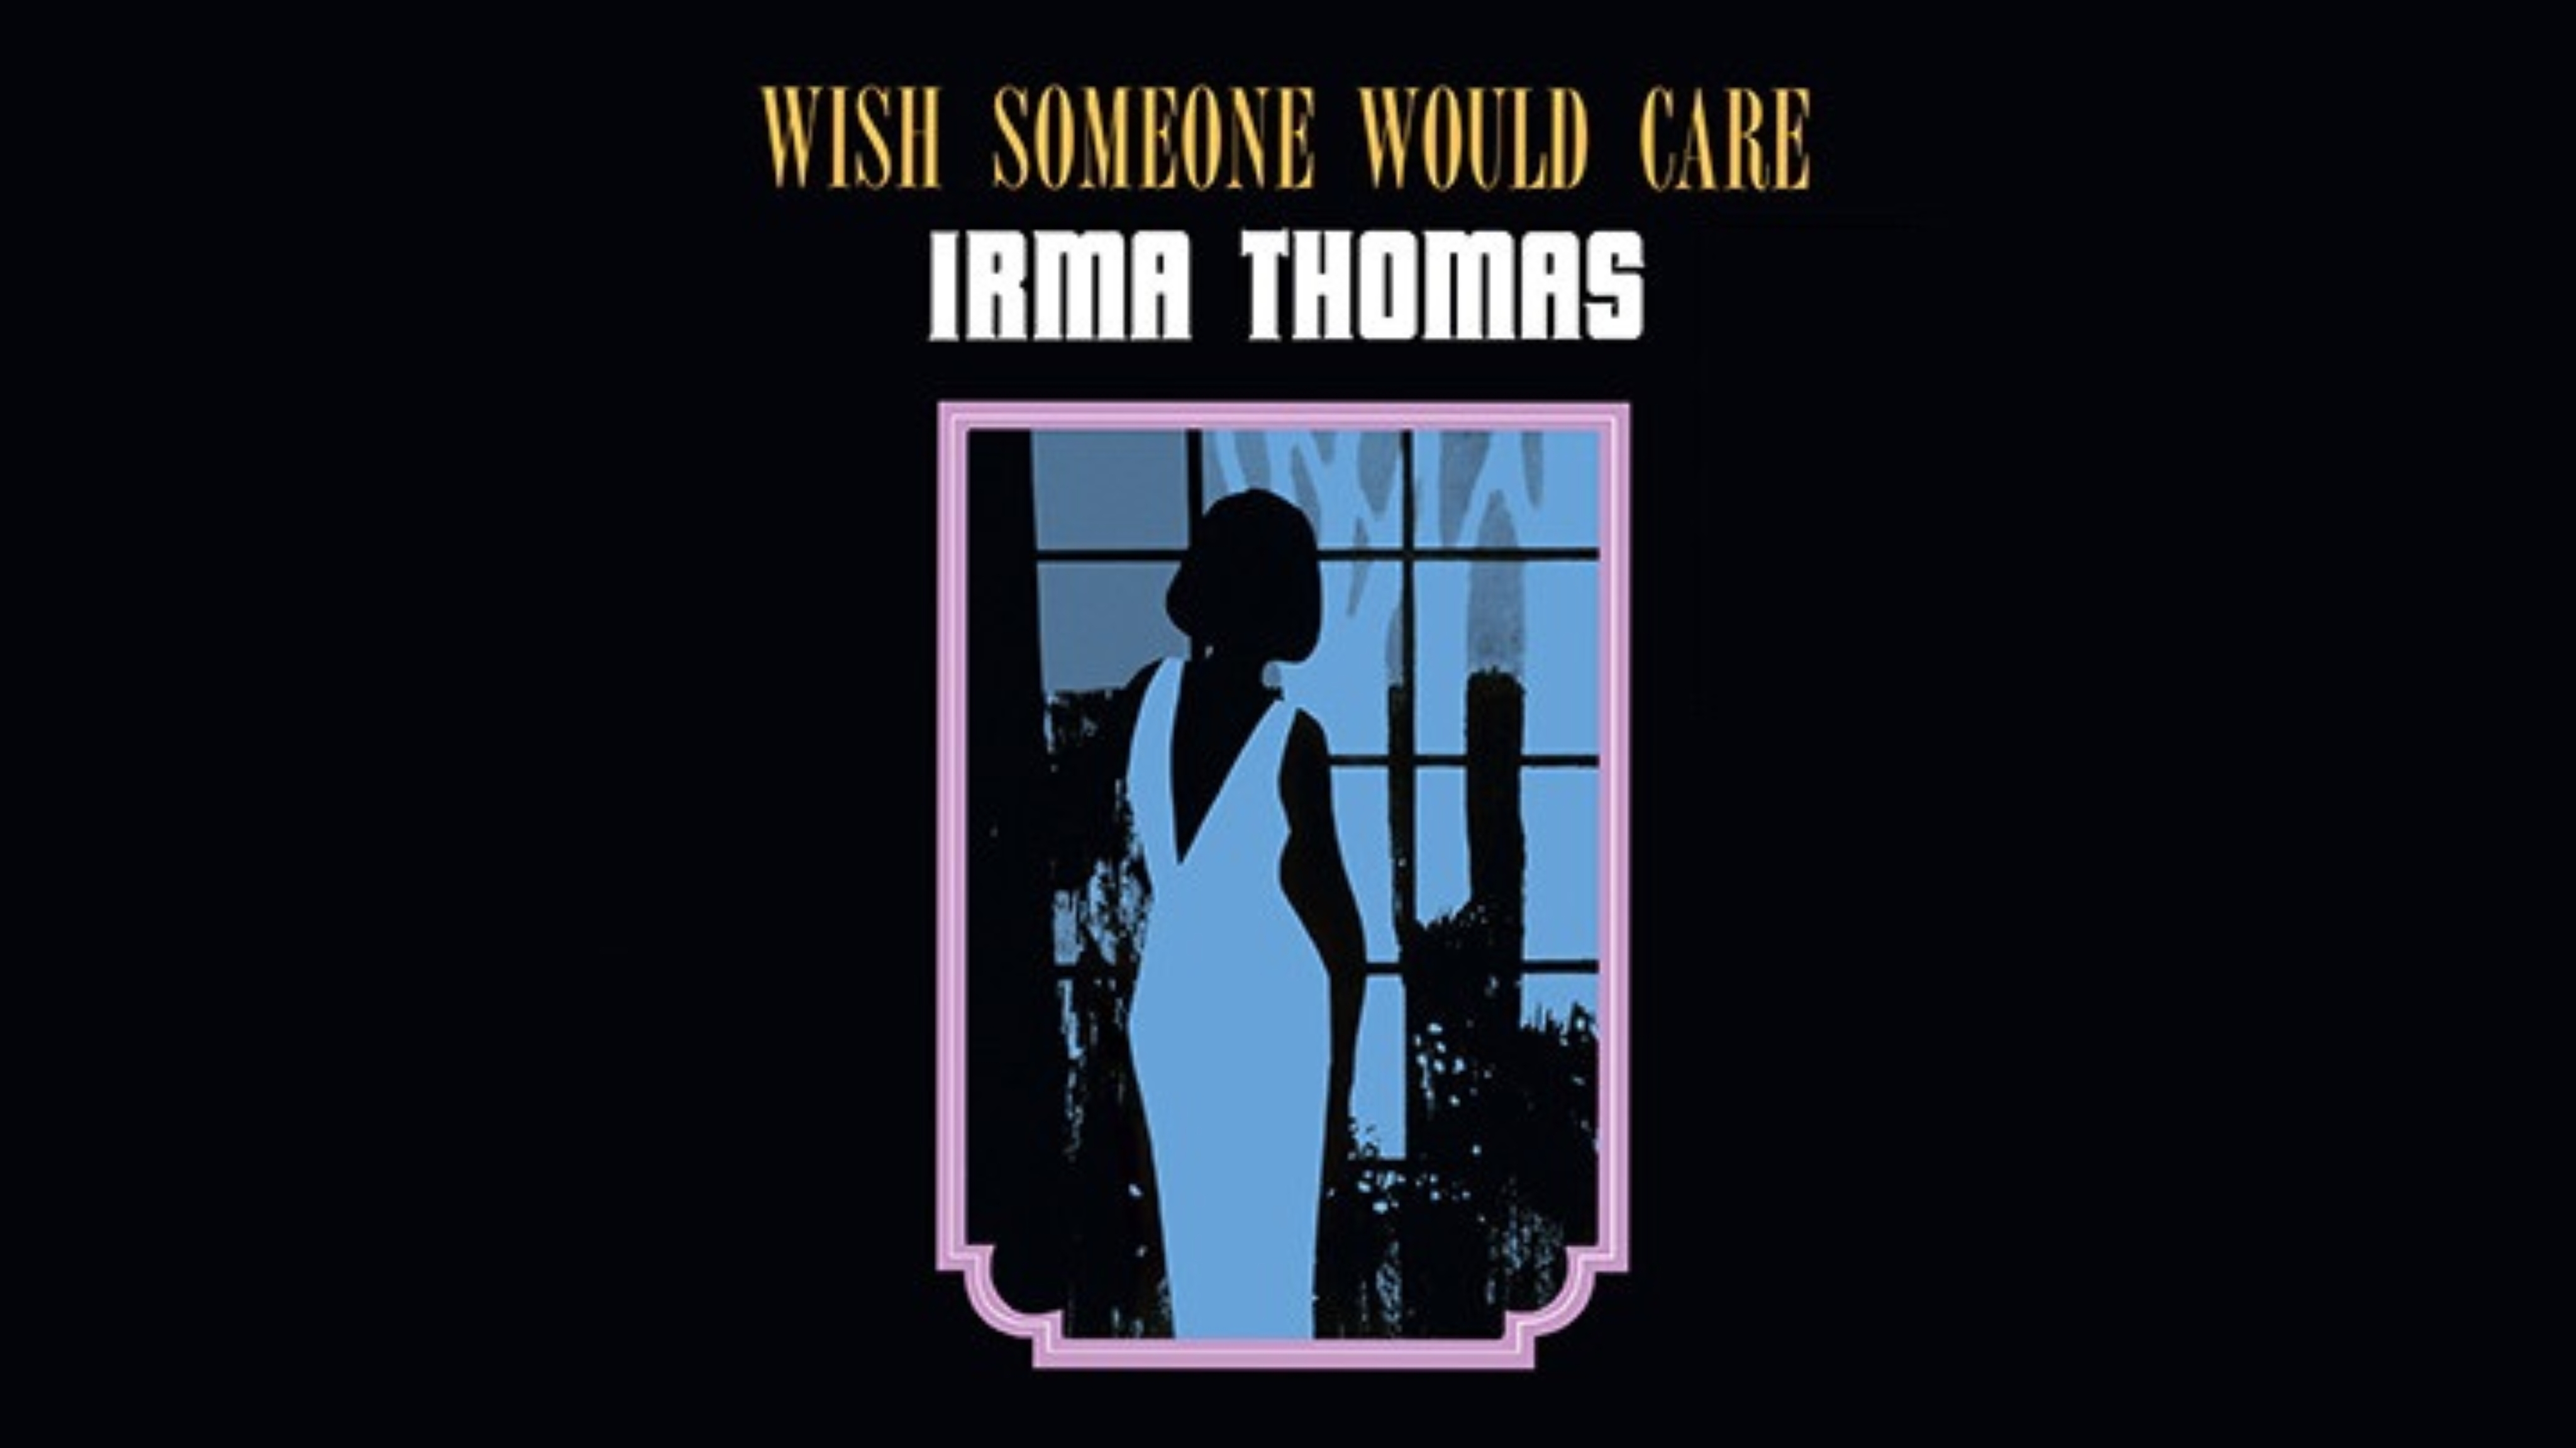 ★IRMA THOMAS★
«With Someone Would Care»
Album / Video Review
Retro / Mini-LP CD / Japan